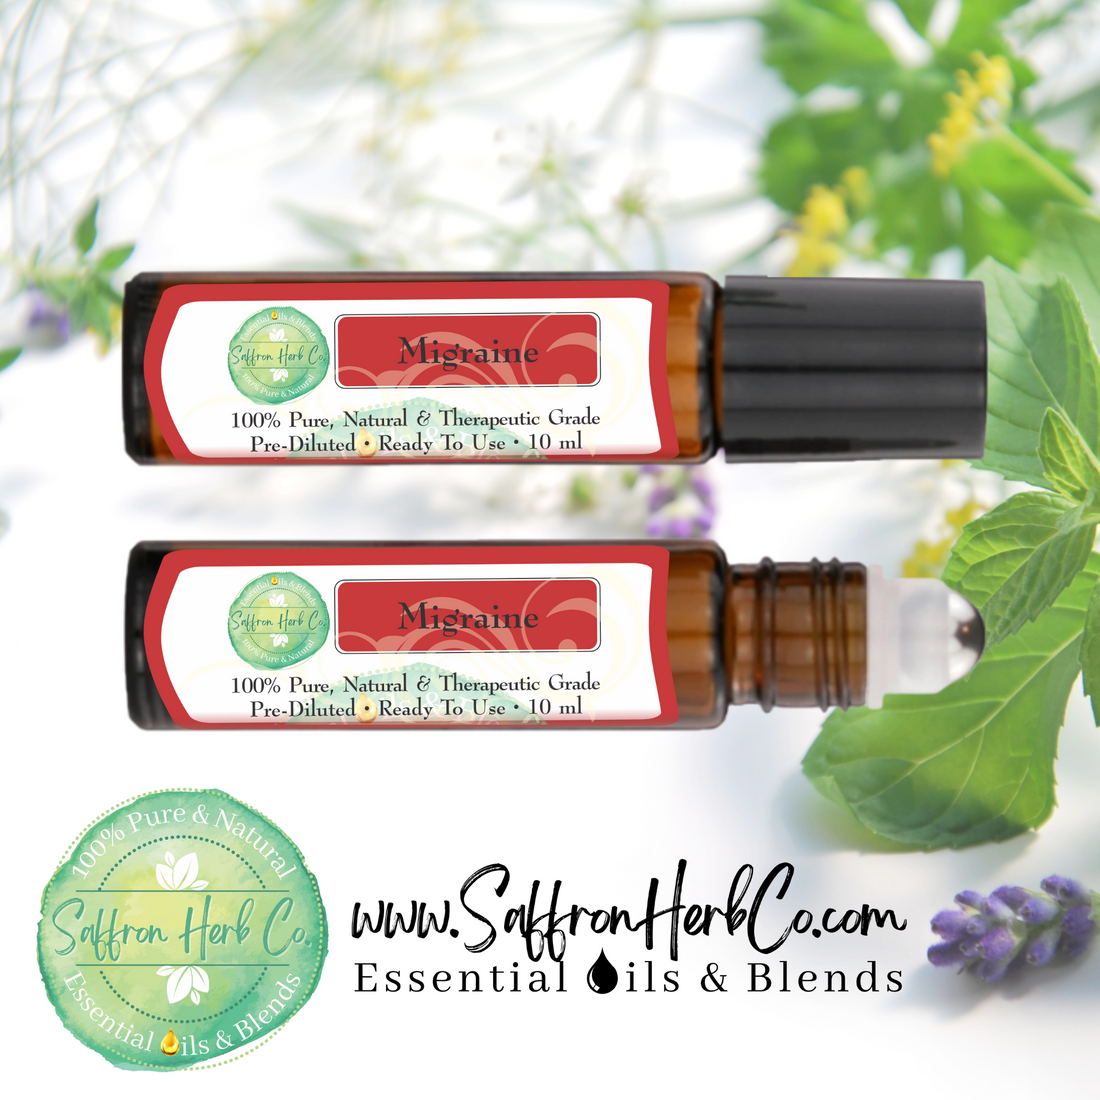 Why choose the Migraine Essential Oil Roller Bottle?